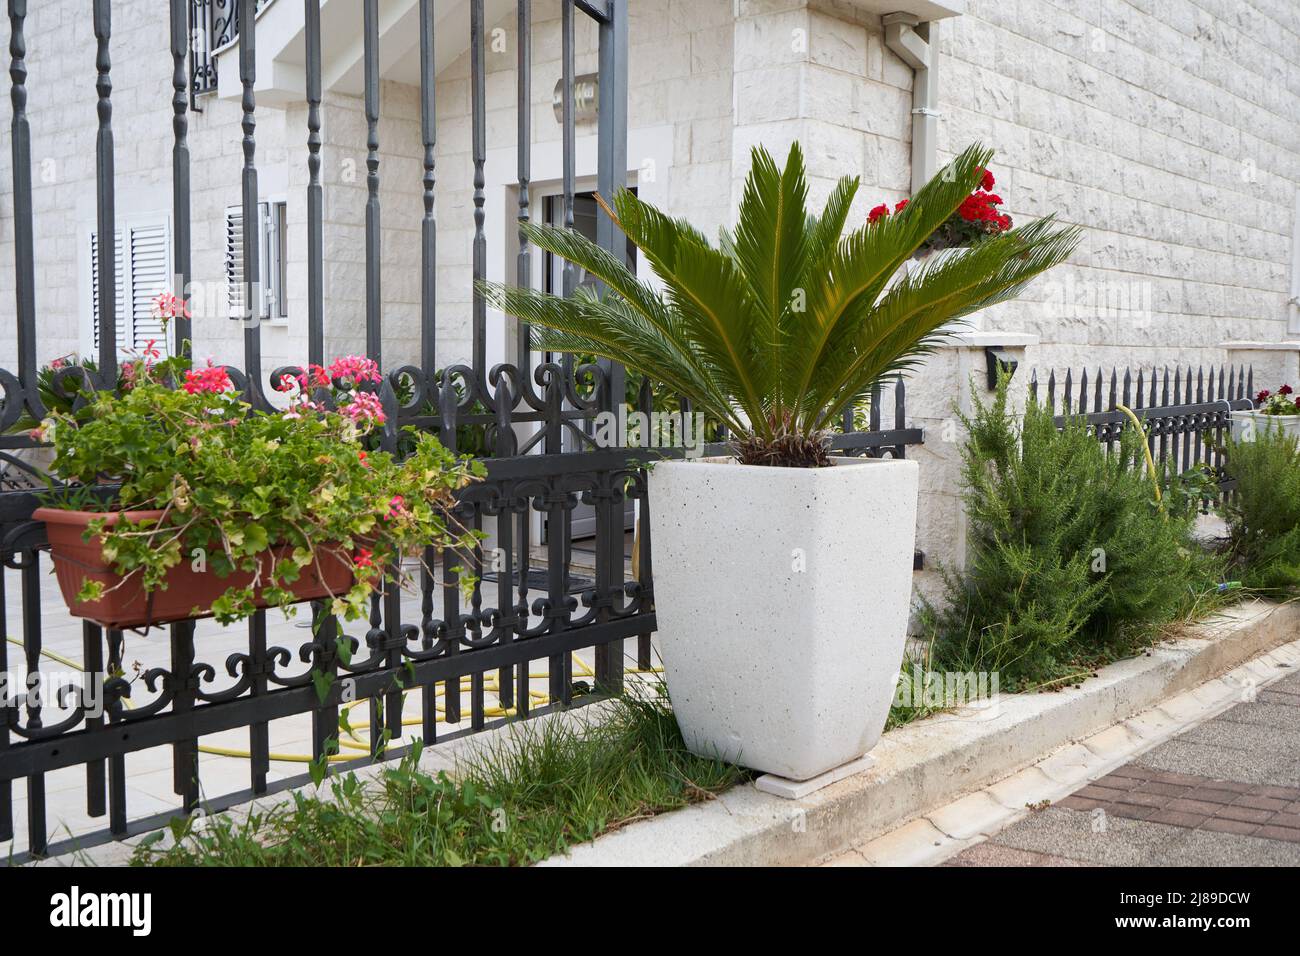 Cycas palm tree in large pots next to the fence Stock Photo